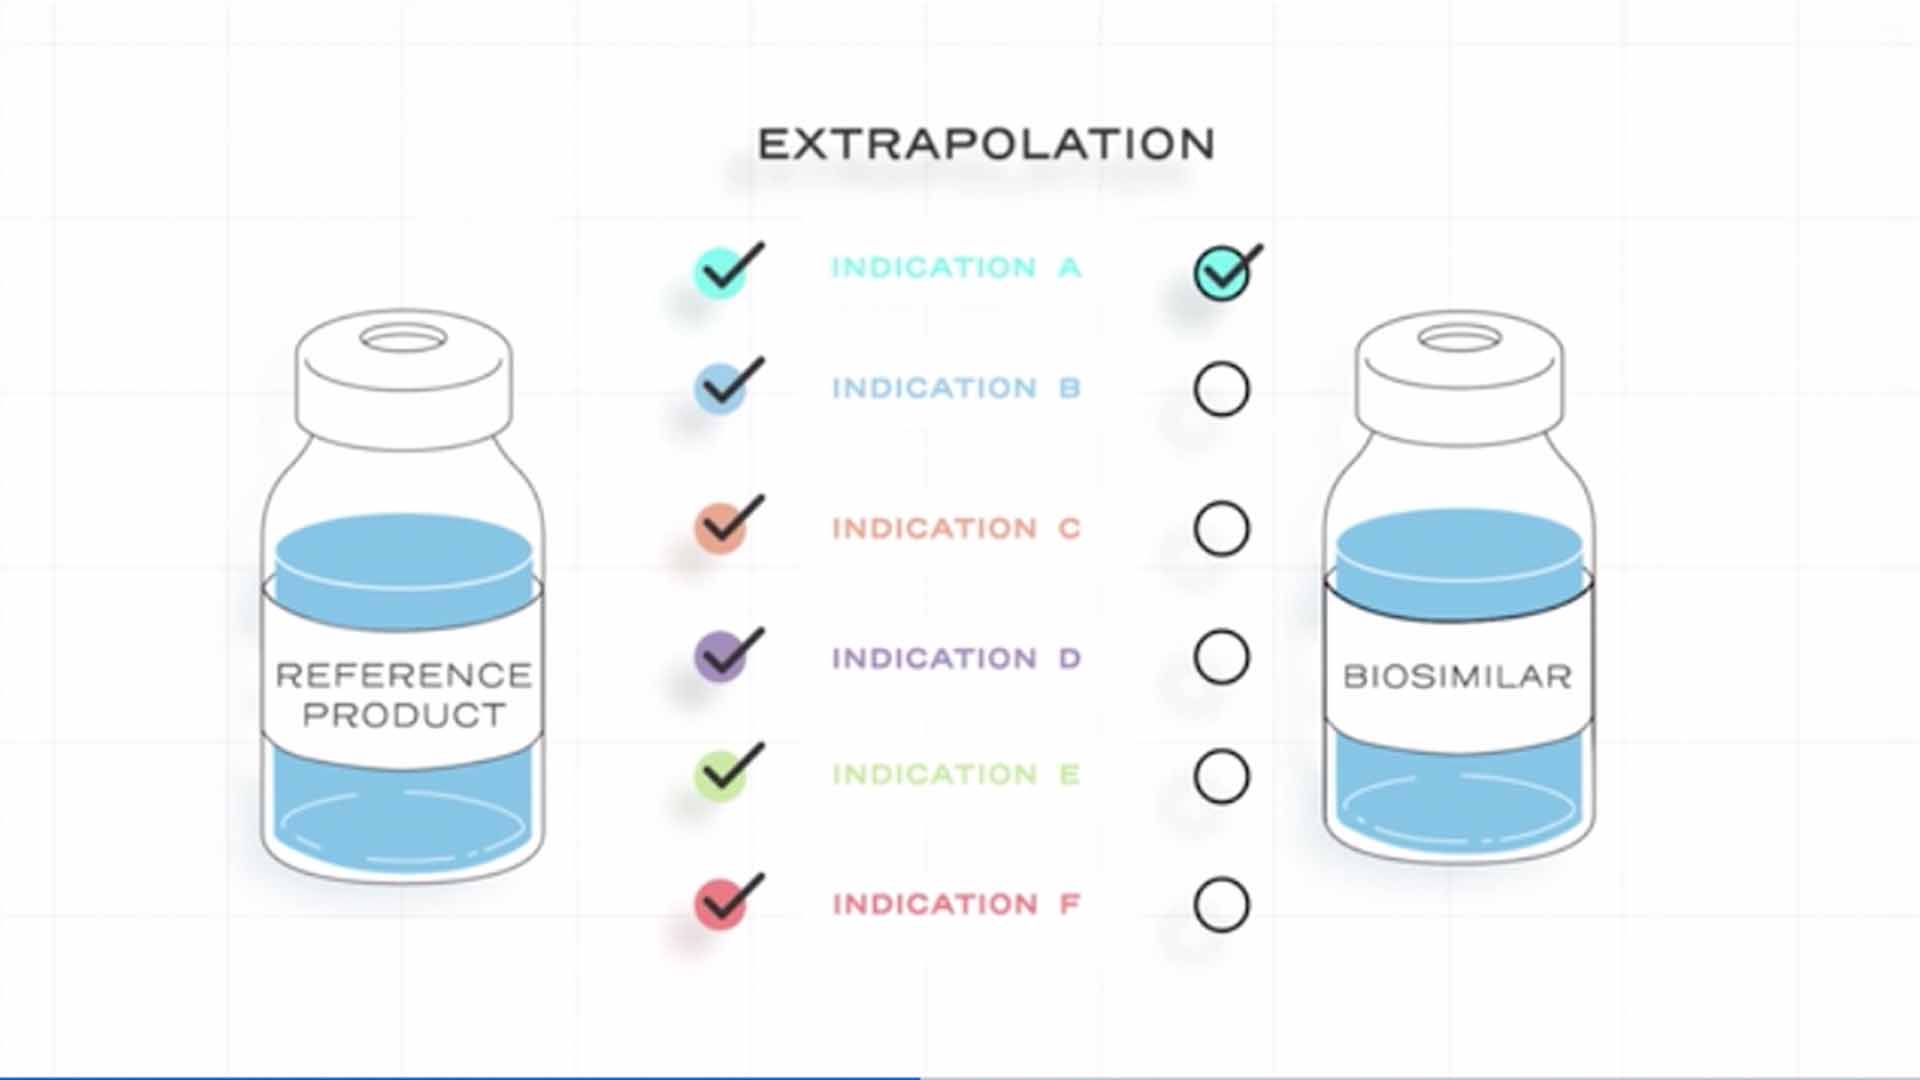 Fast Facts About Extrapolation for Biosimilars